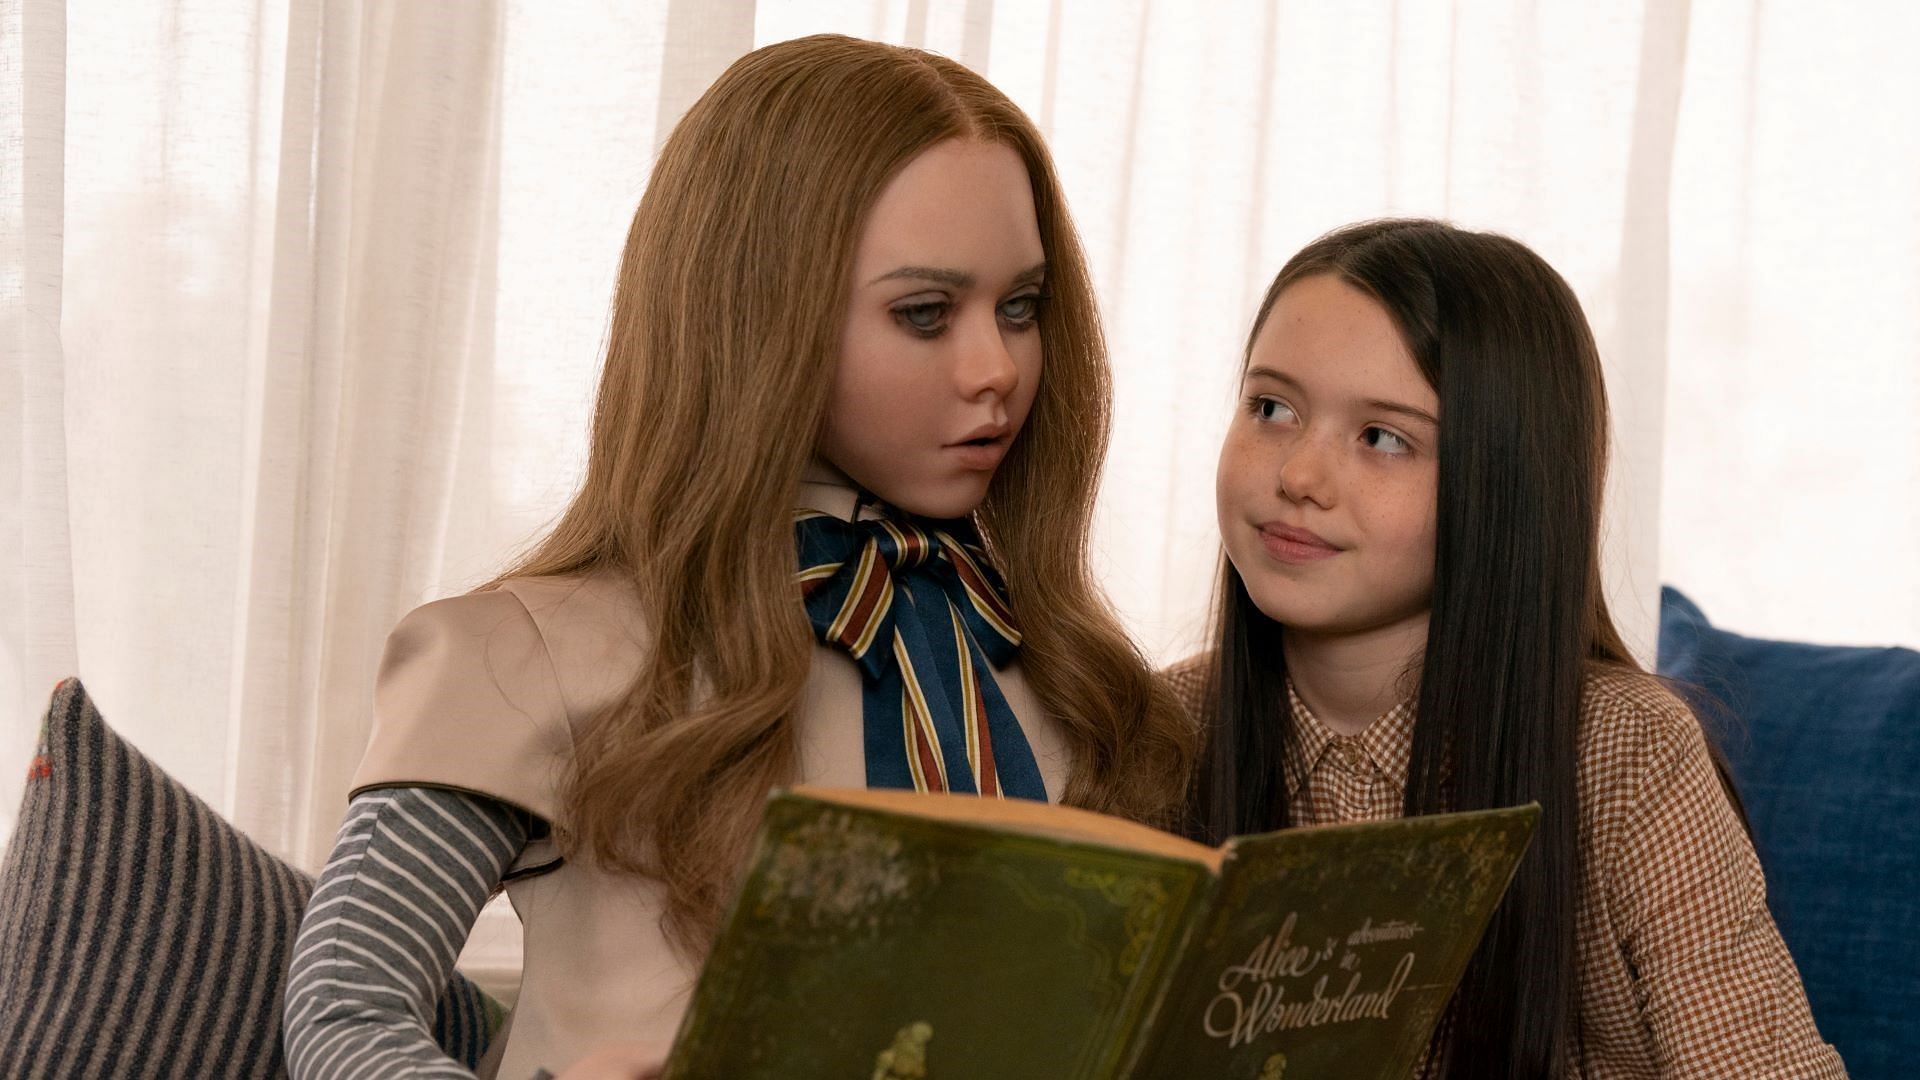 M3GAN and Cady, played by Amie Donald/Jenna Davis and Violet McGraw, respectively (Image via Blumhouse Productions/Universal Pictures)